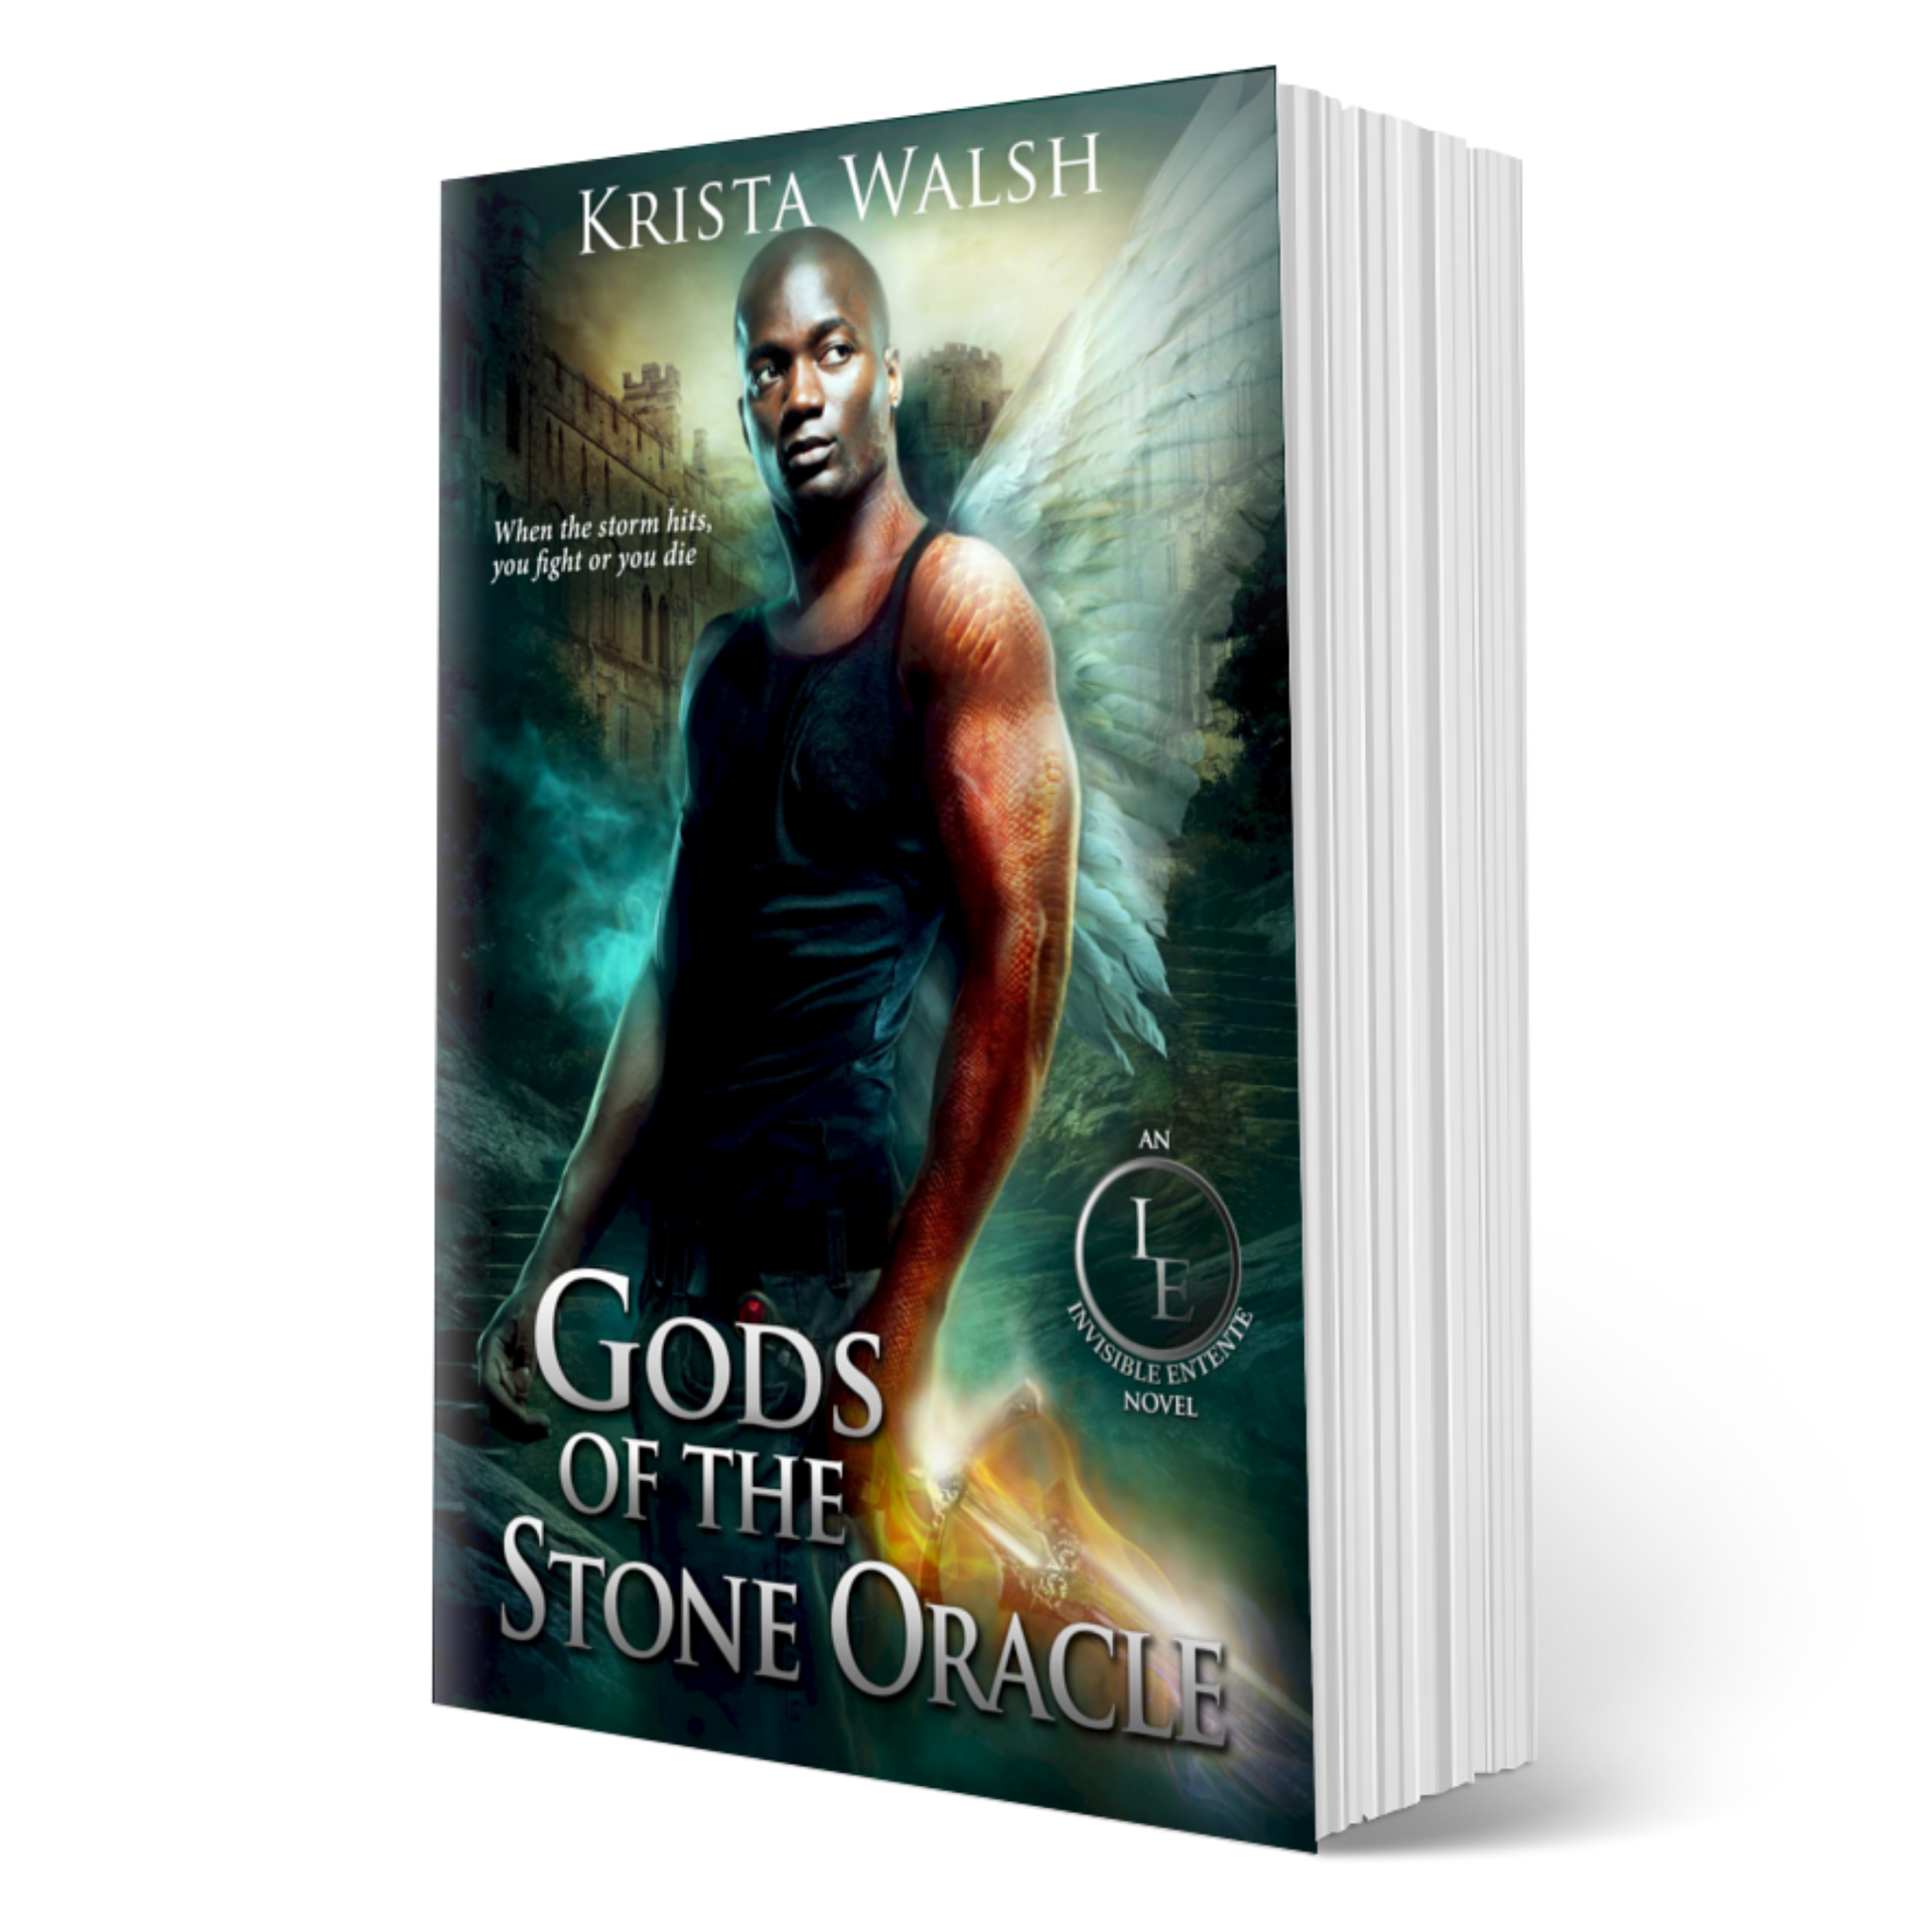 Black Man with scaled left arm holding a sword looking over shoulder, white wings stretched out behind him. Text: Krista Walsh, Gods of the Stone Oracle